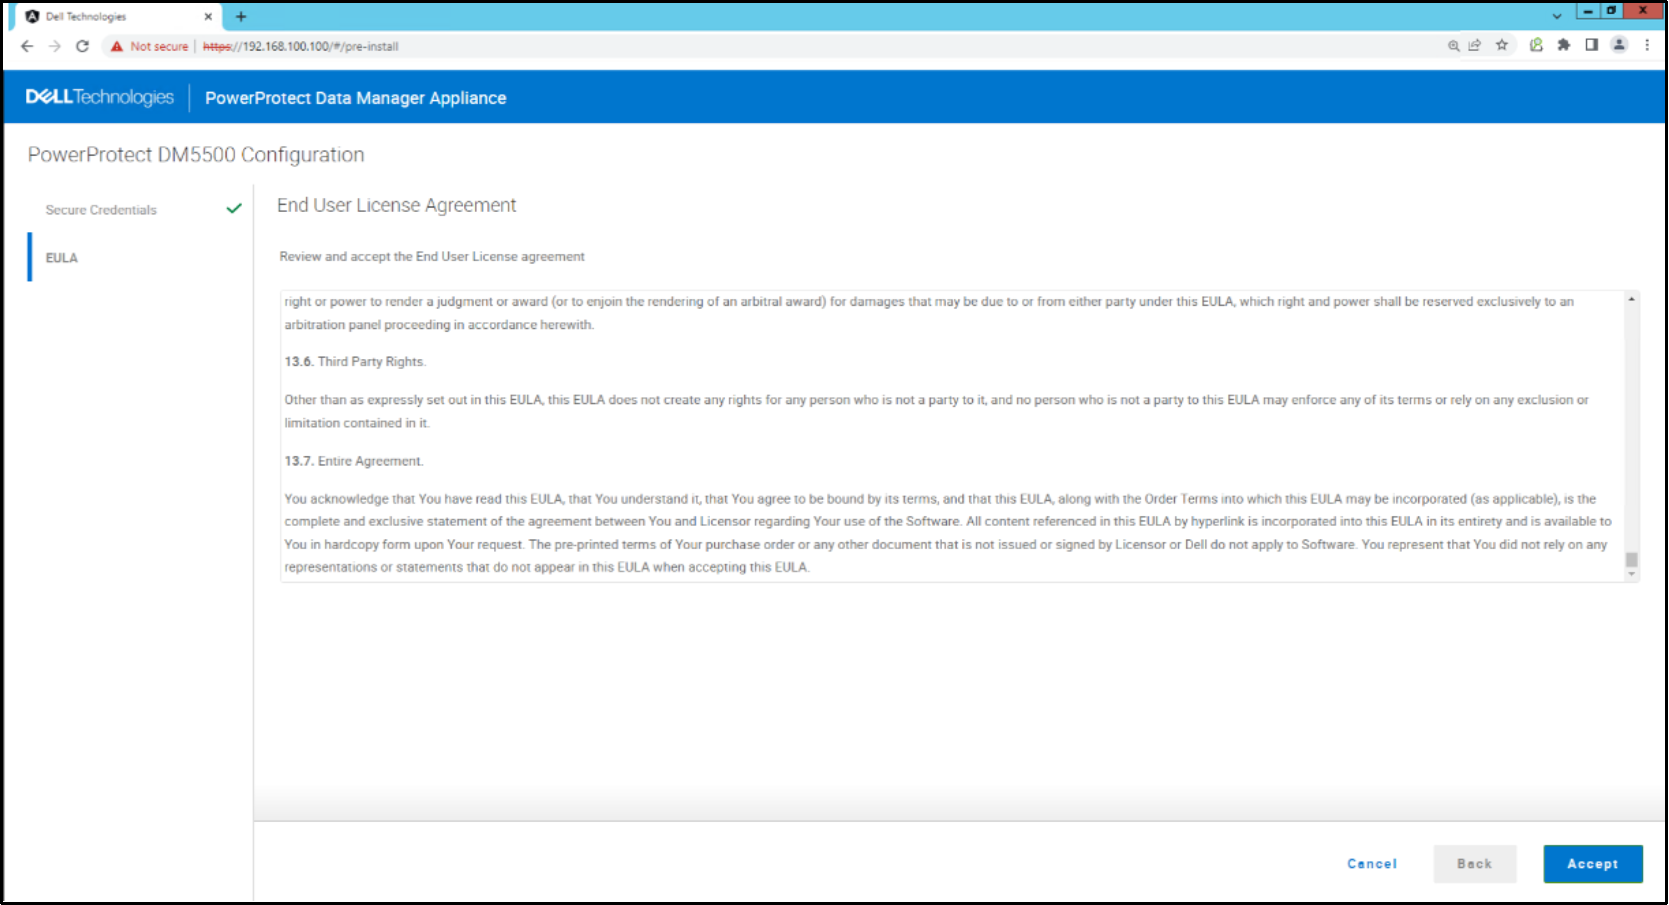 The image depicts the end user license agreement for the appliance.